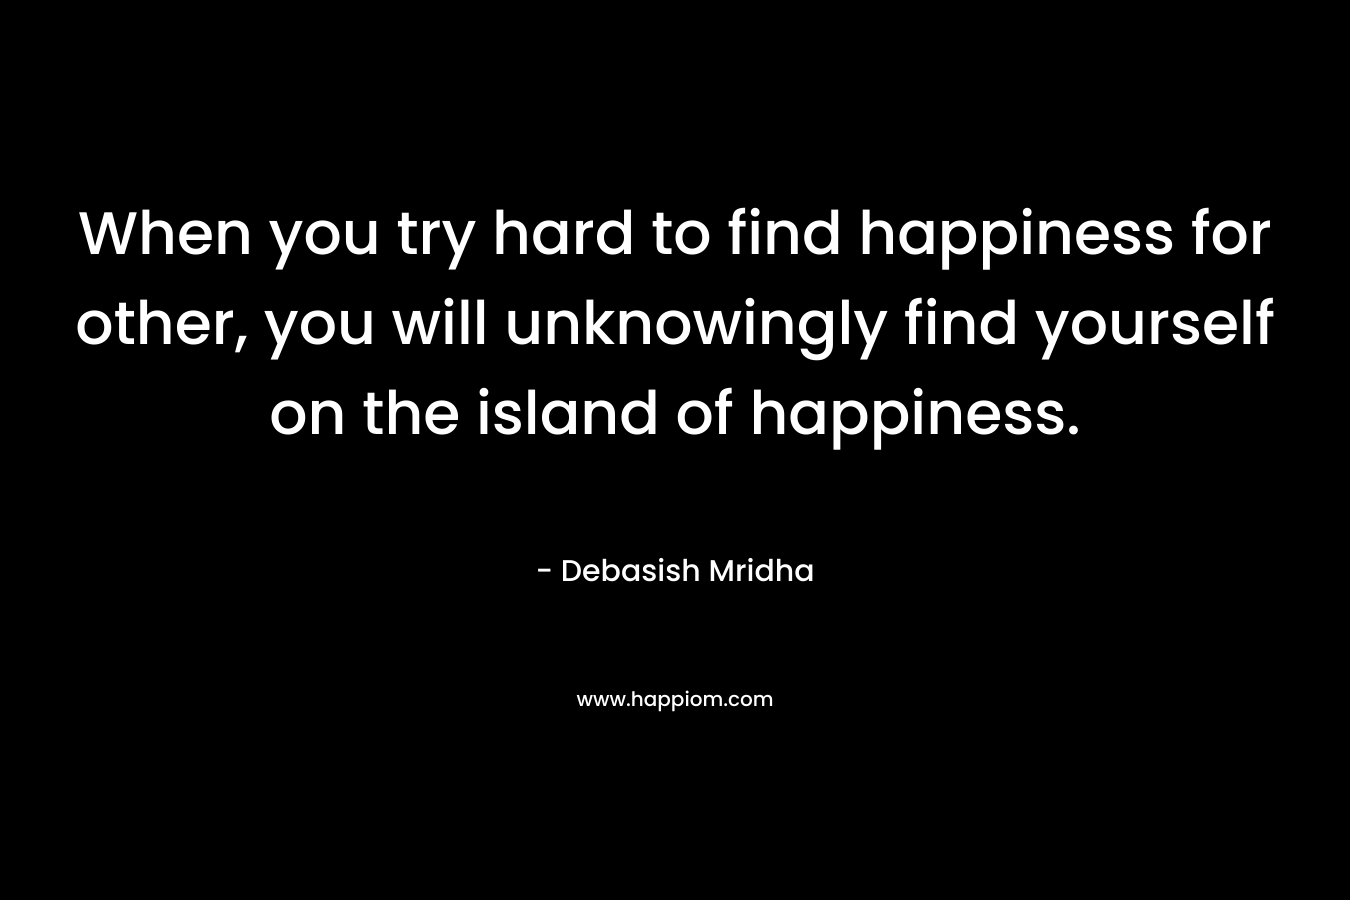 When you try hard to find happiness for other, you will unknowingly find yourself on the island of happiness.